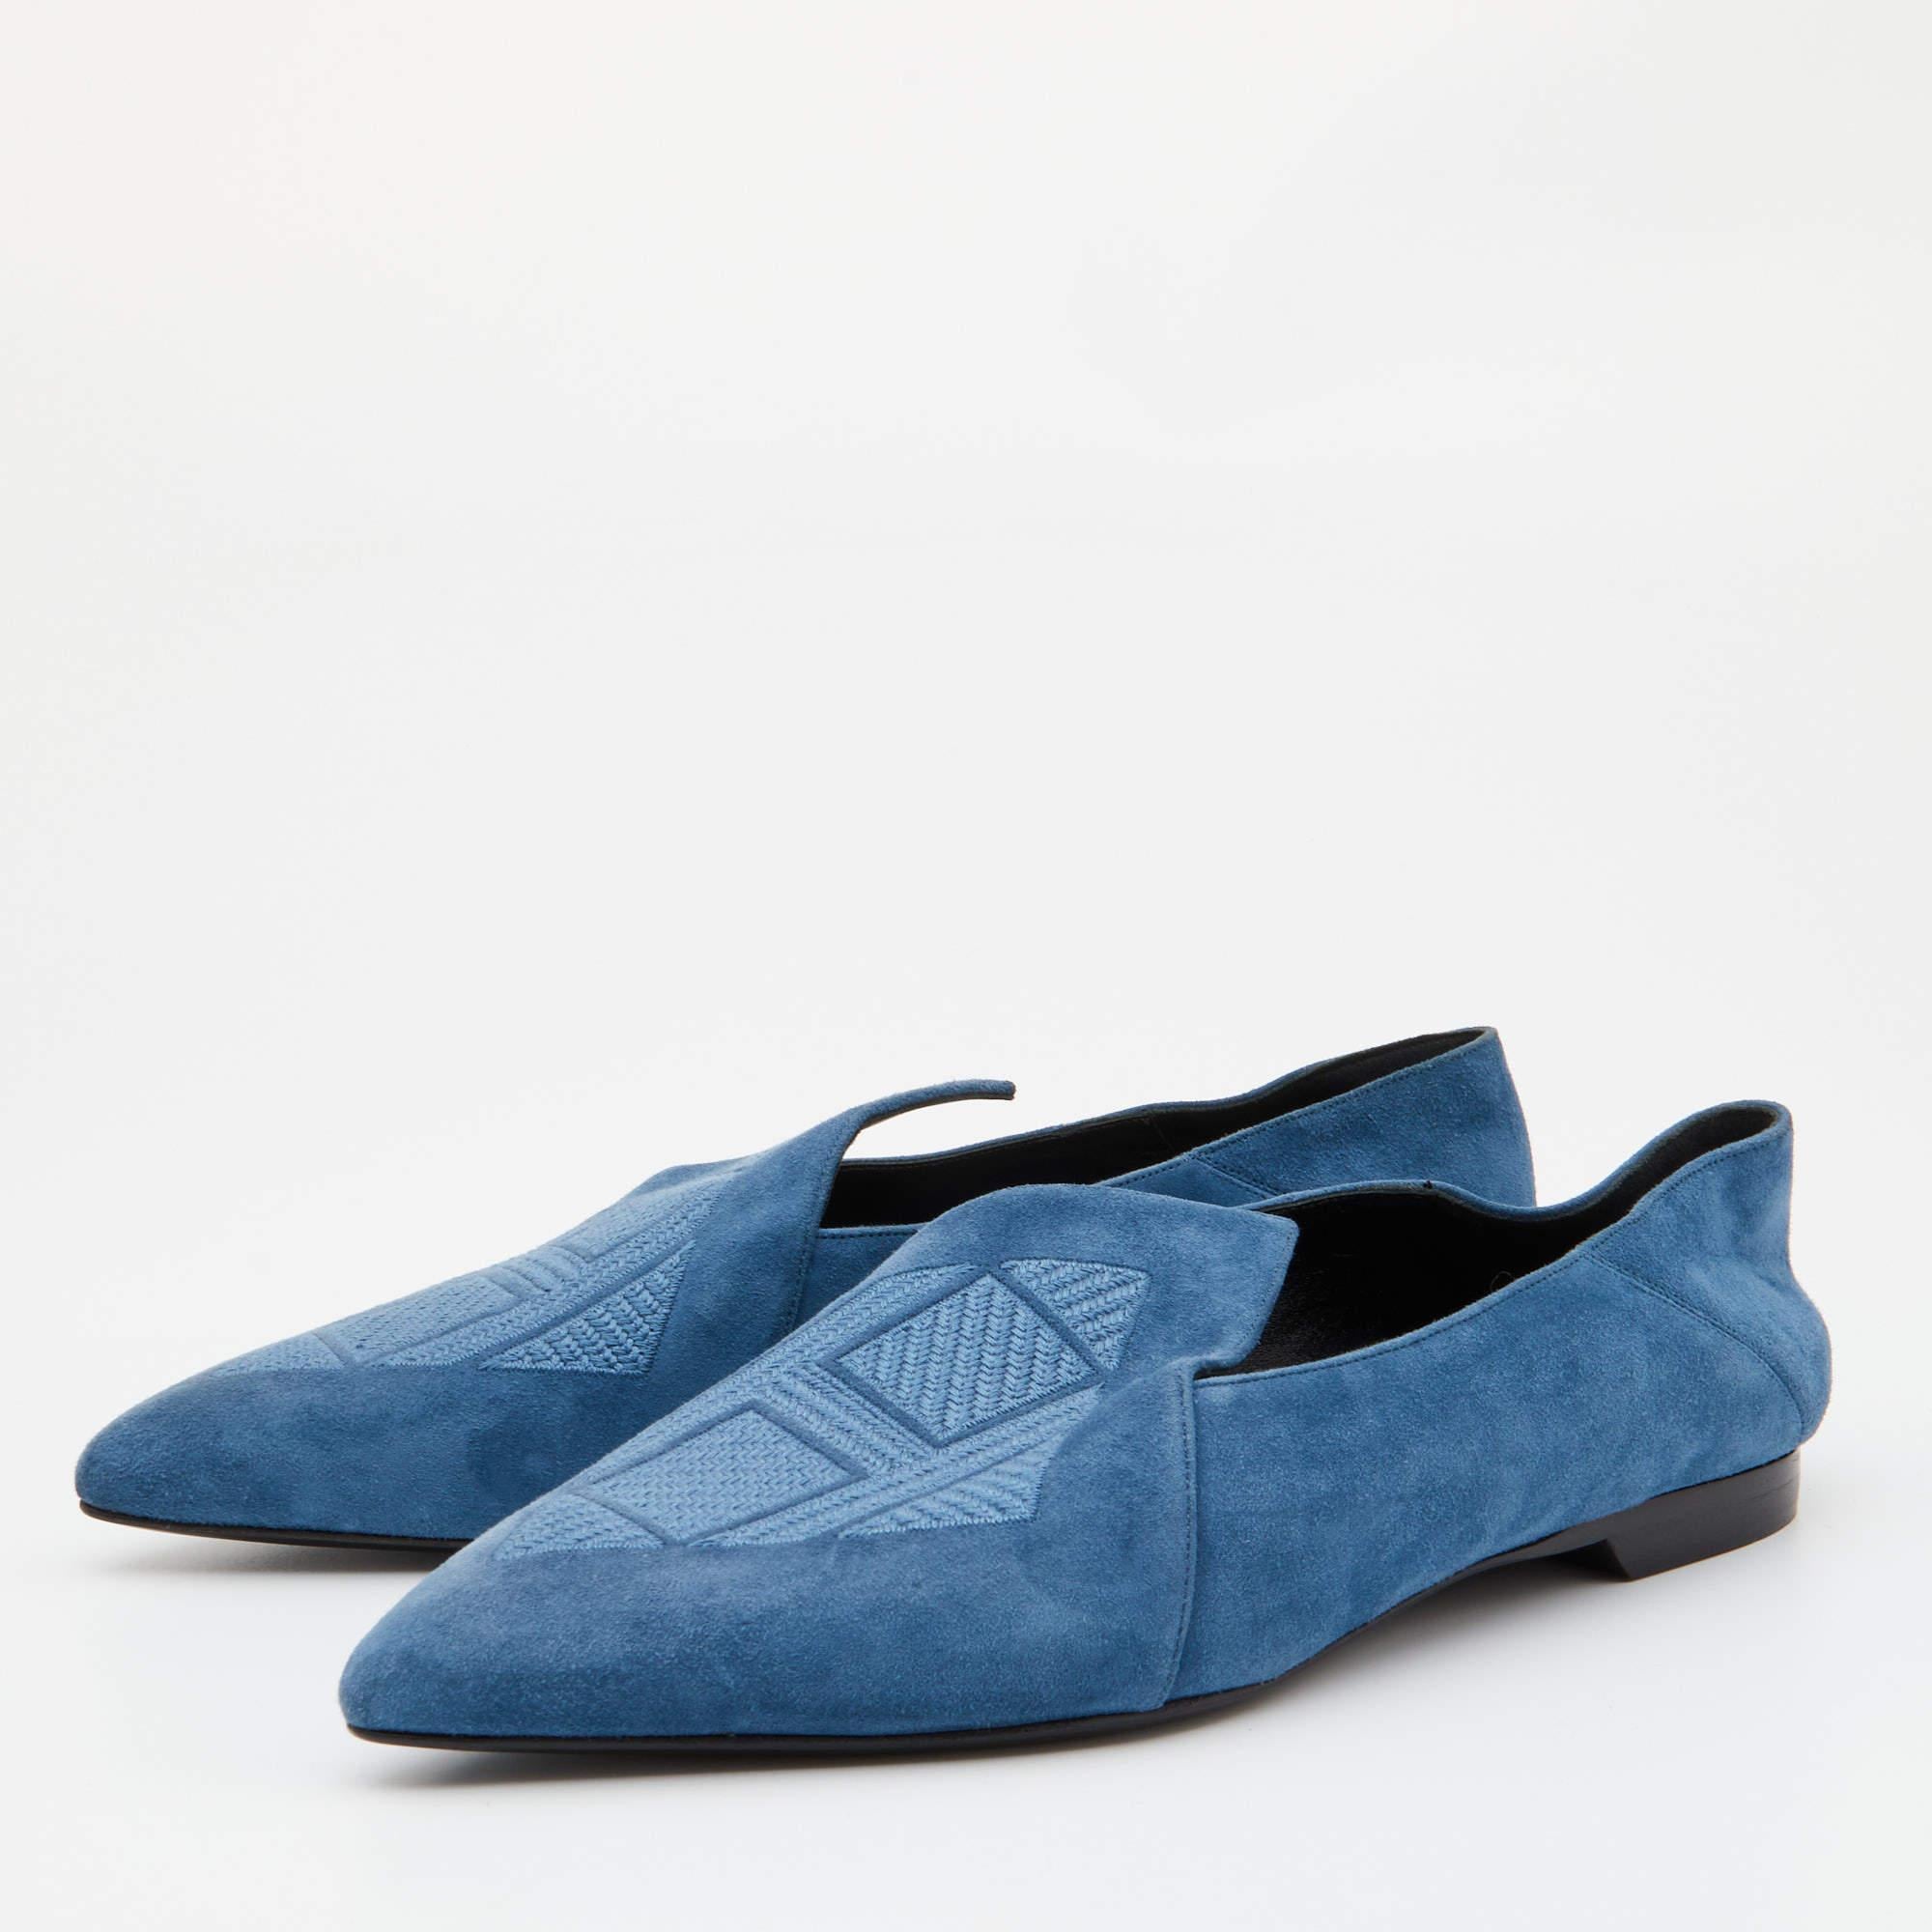 Hermes Blue Suede Pointed Toe Ballet Flats Size 39 2